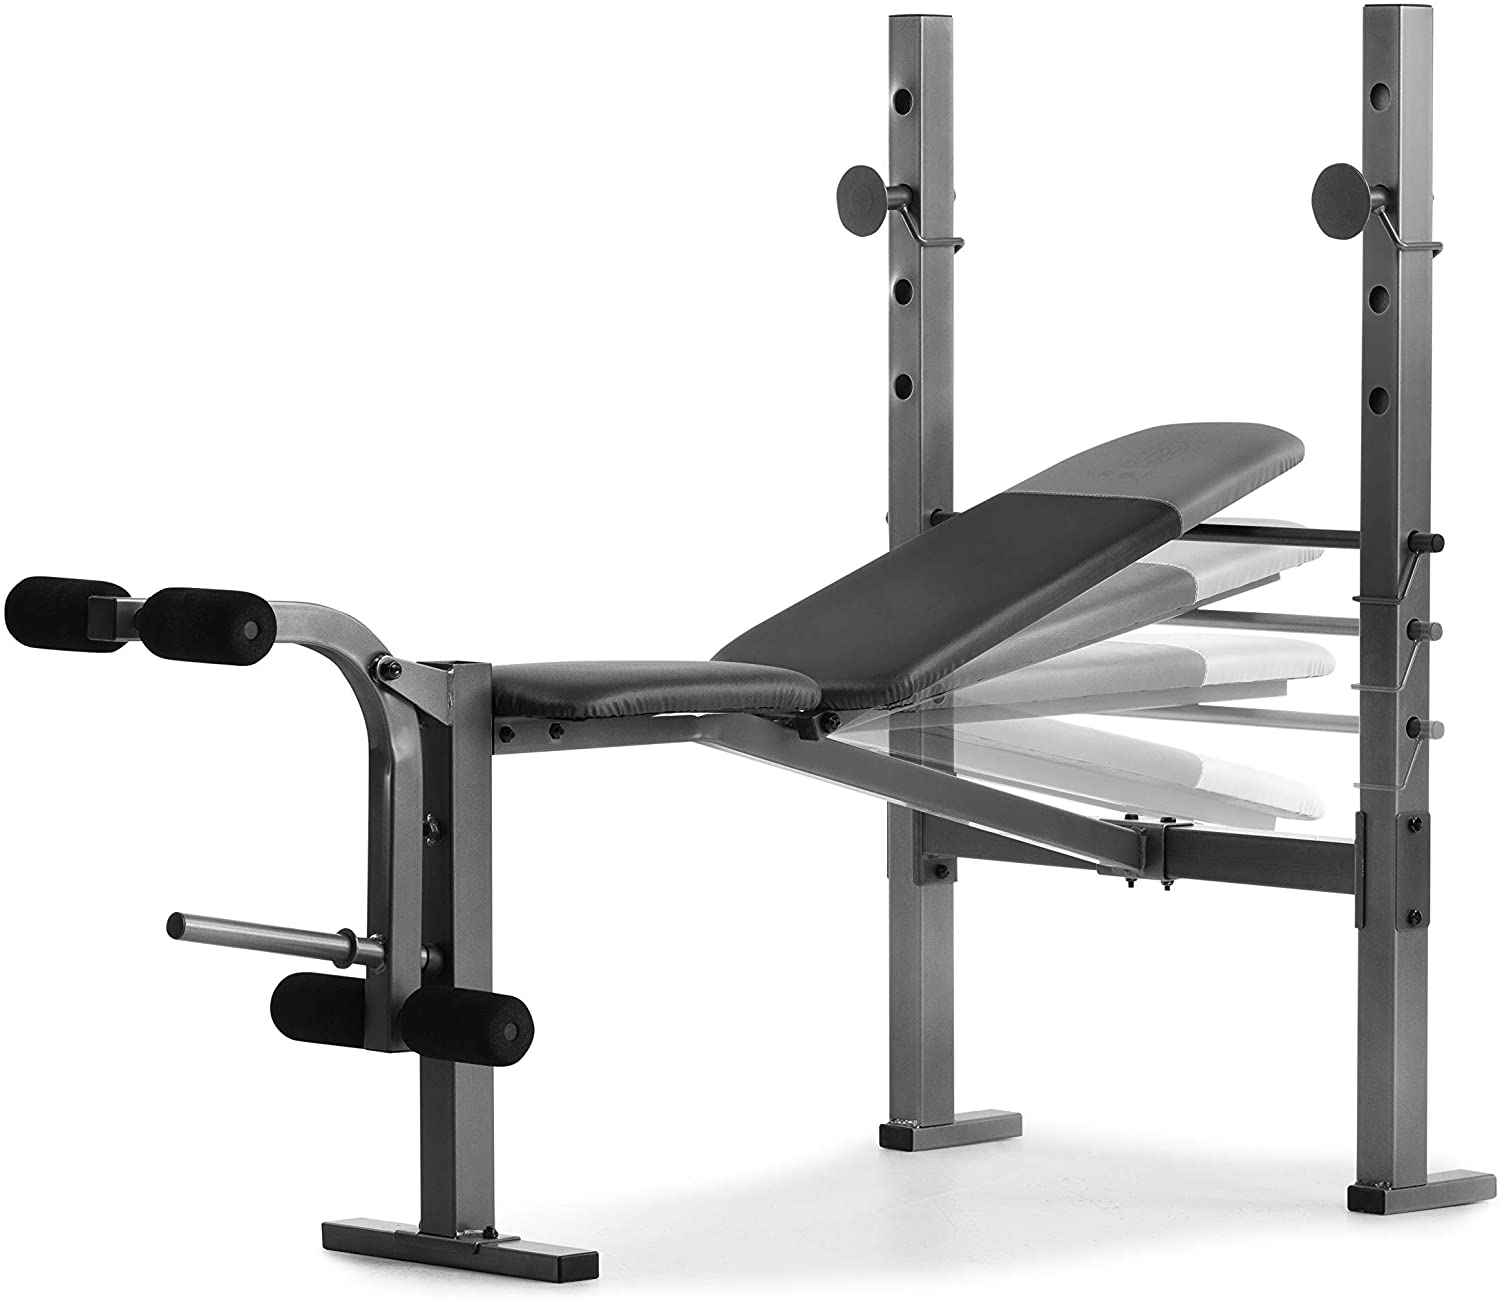 Weider XR 6.1 Multi-Position Weight Bench with Leg Developer and Exercise Chart - image 1 of 1